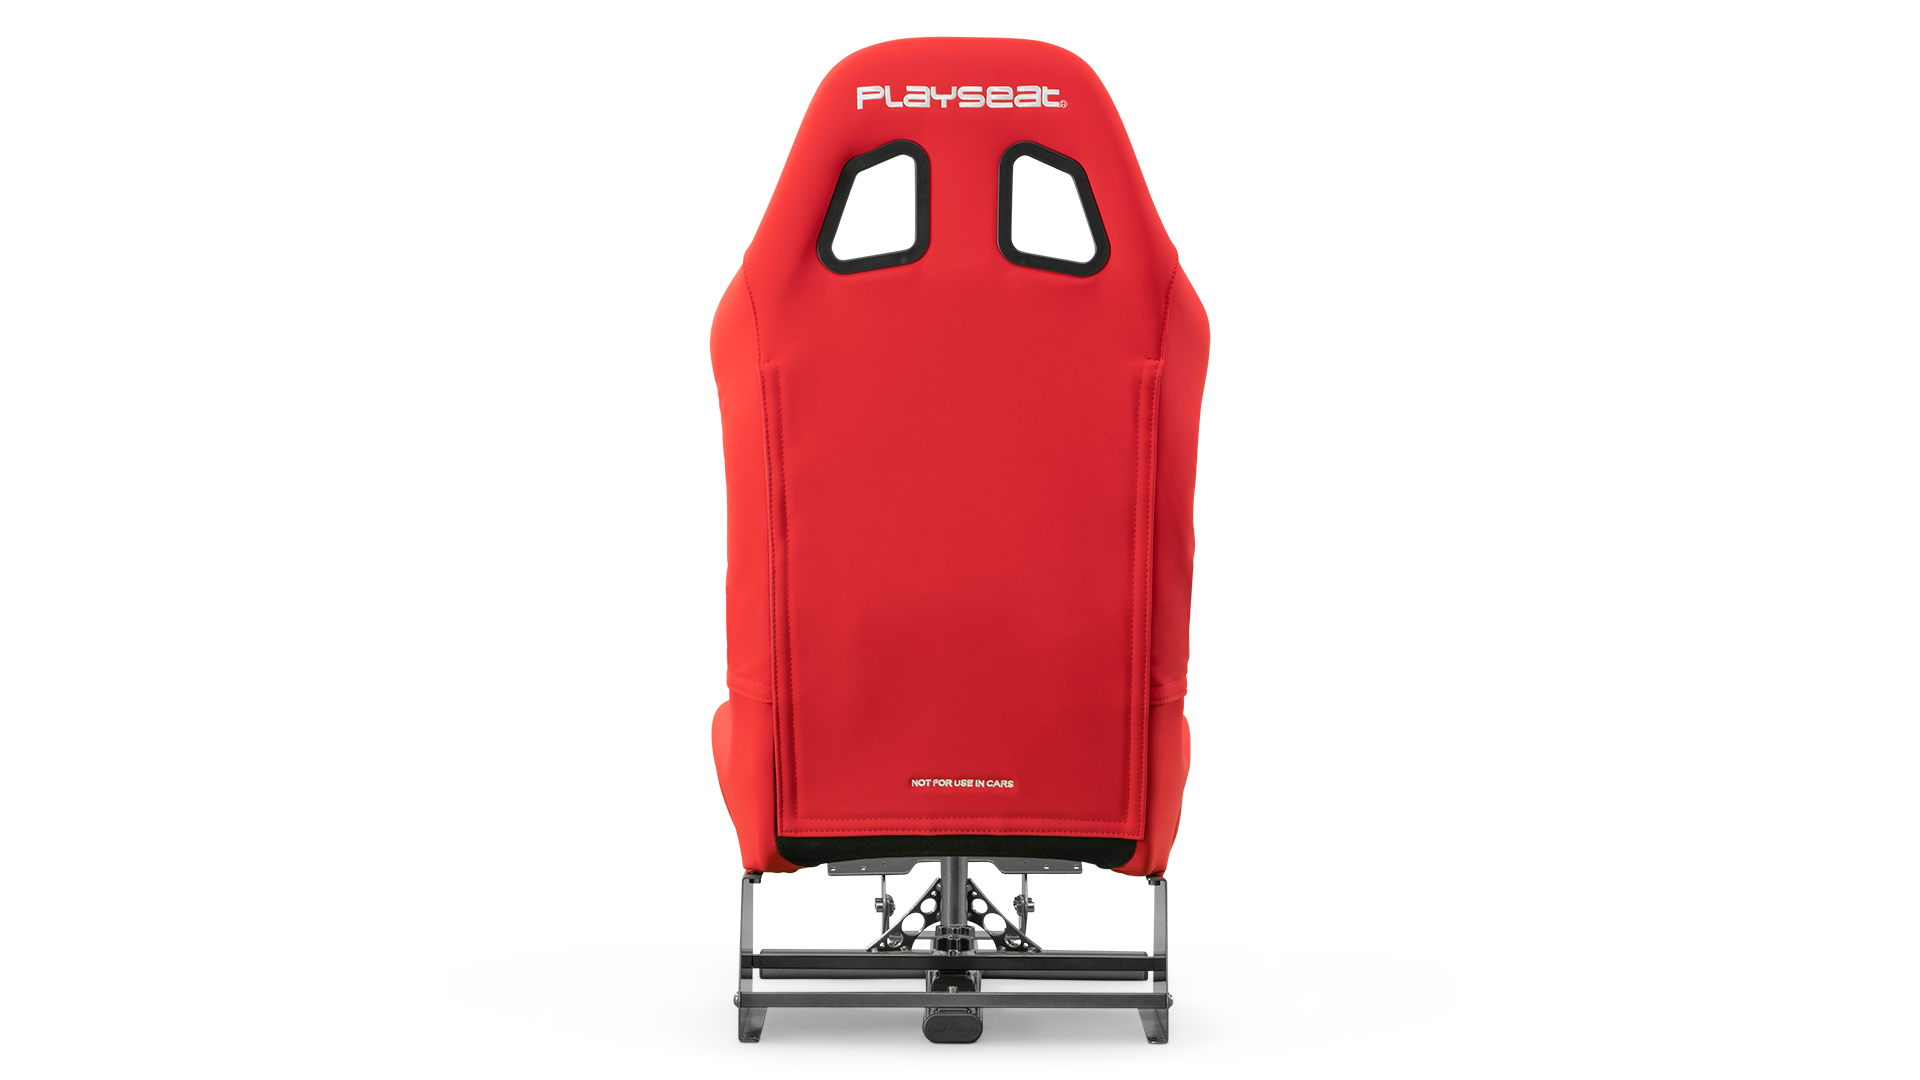 playseat-evolution-red-racing-simulator-back-view-1920x1080-1.png